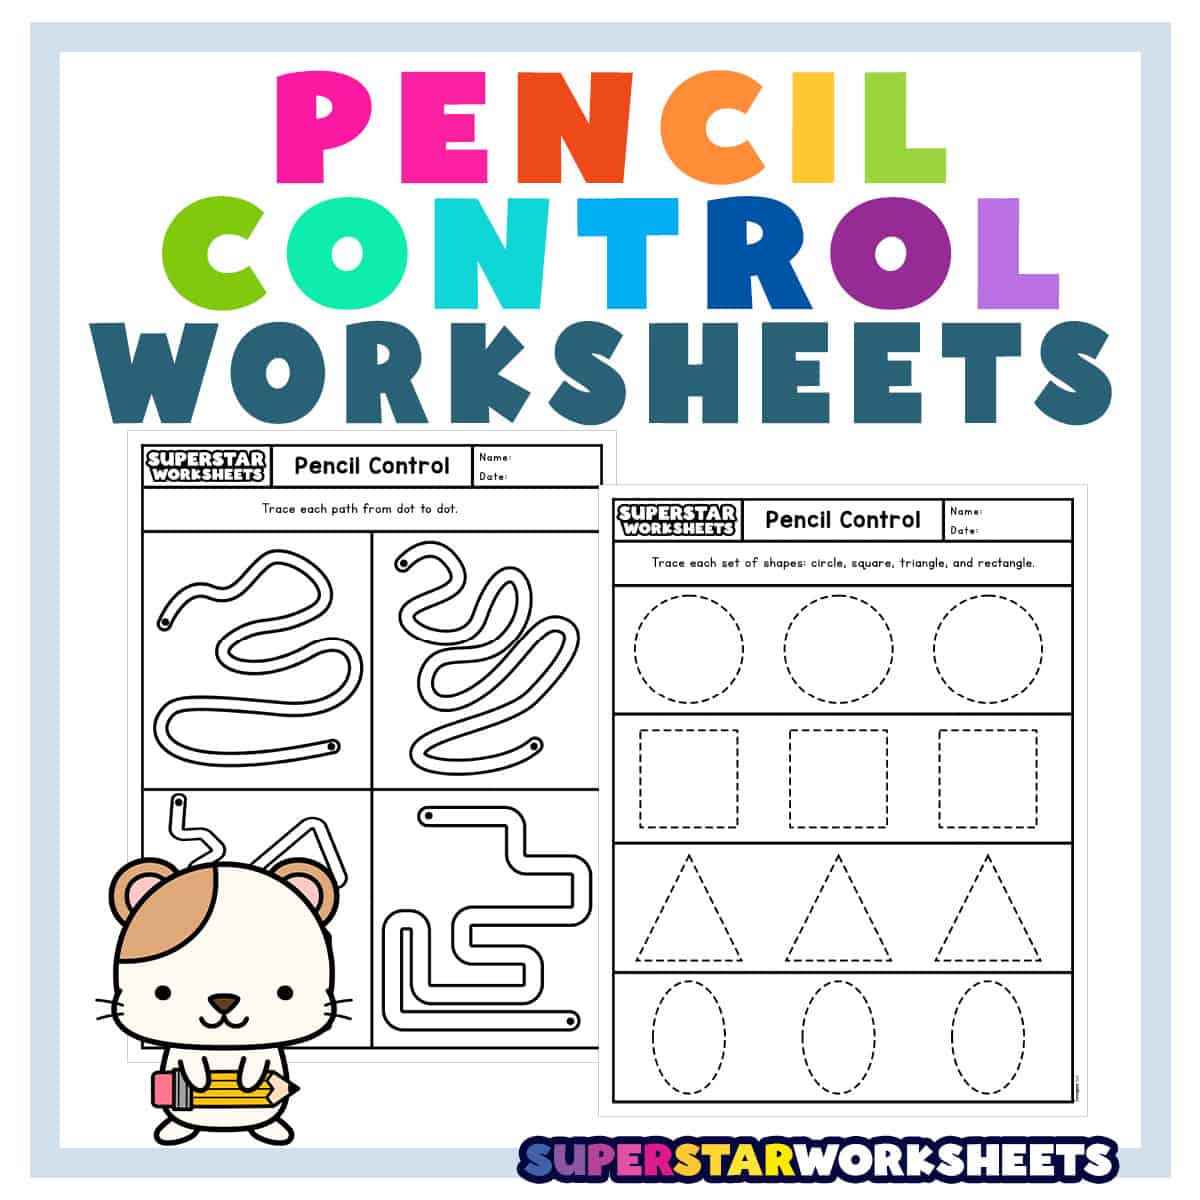 Pencil Control Tracing Workbook for Kids Graphic by YOOY